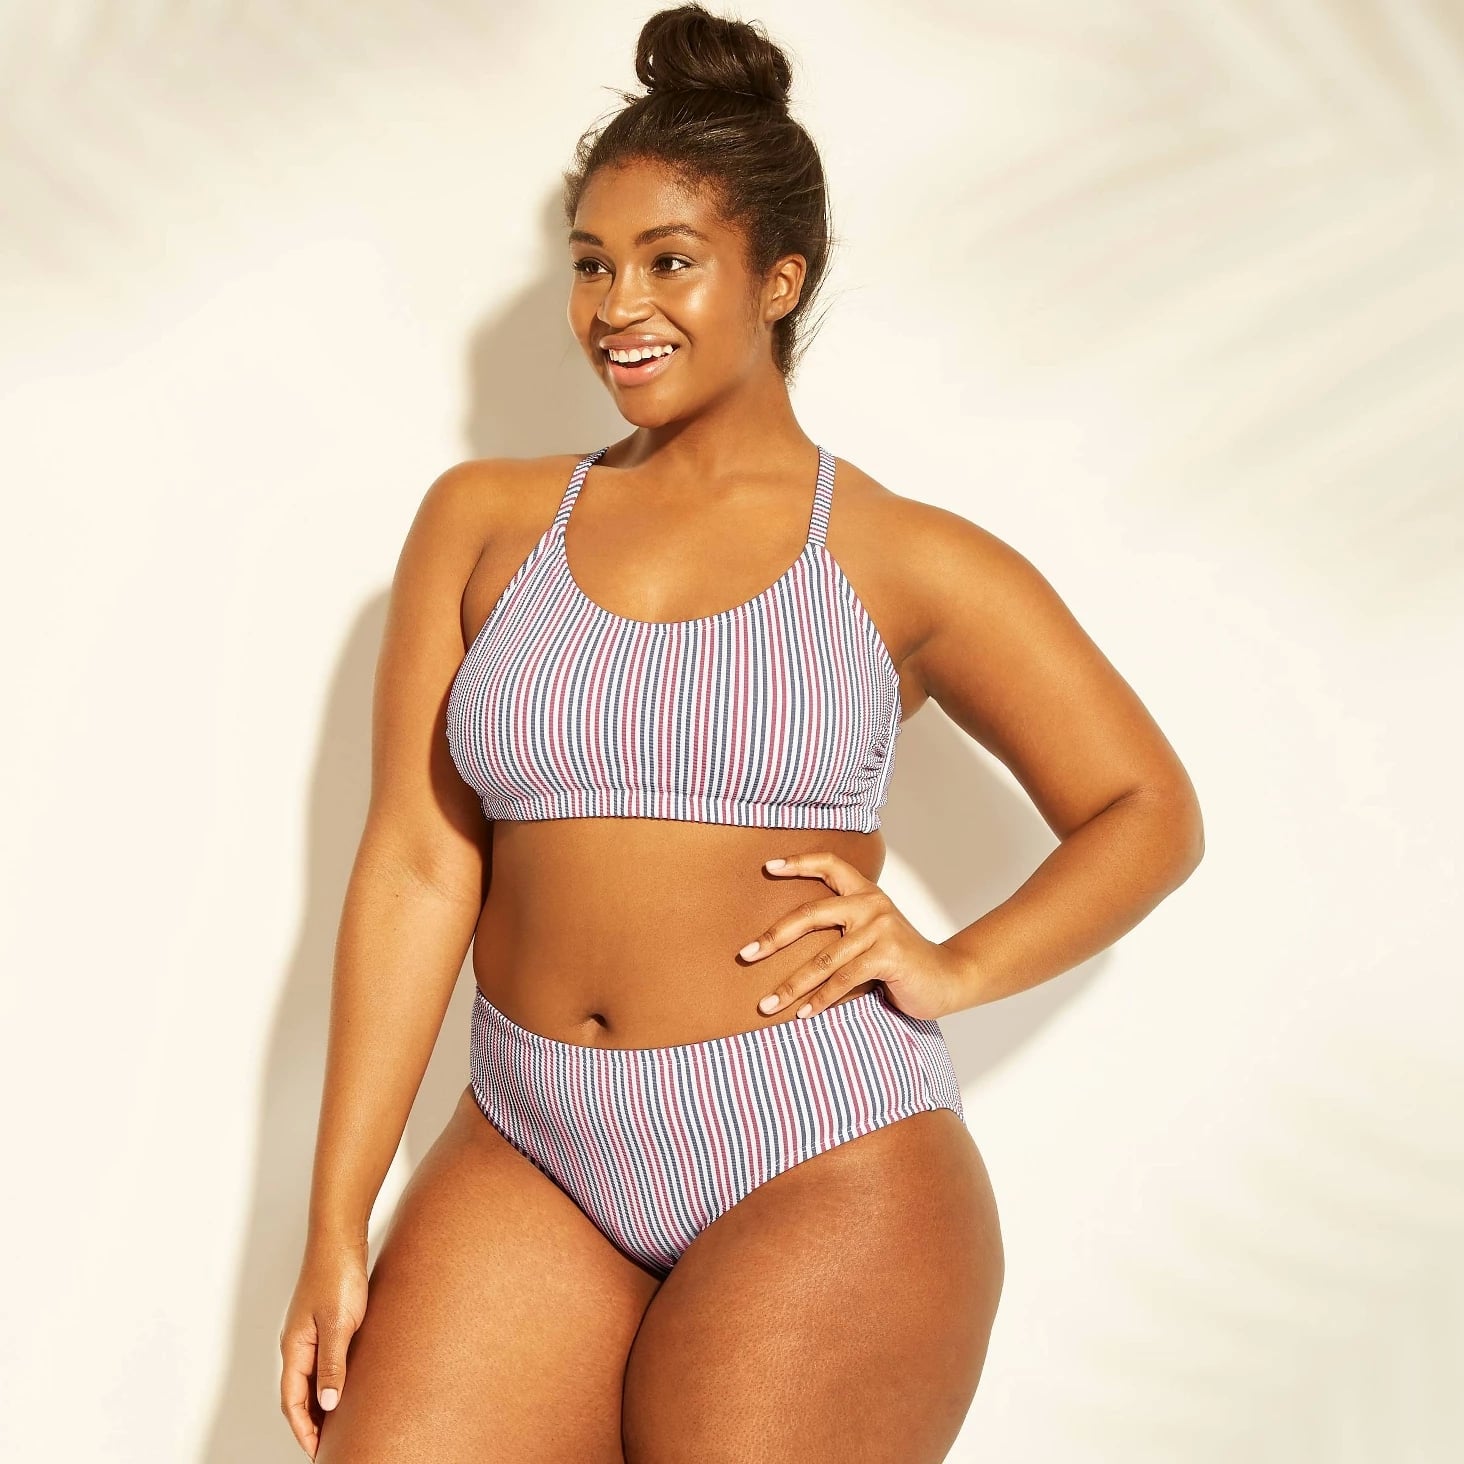 Plus-Size Stripe Bralette Bikini Top and Seersucker Hipster Bikini Bottoms | Target's Swimsuits That Are Cute Every Curve — Shop Our 45 Favorites | POPSUGAR Fashion Photo 20